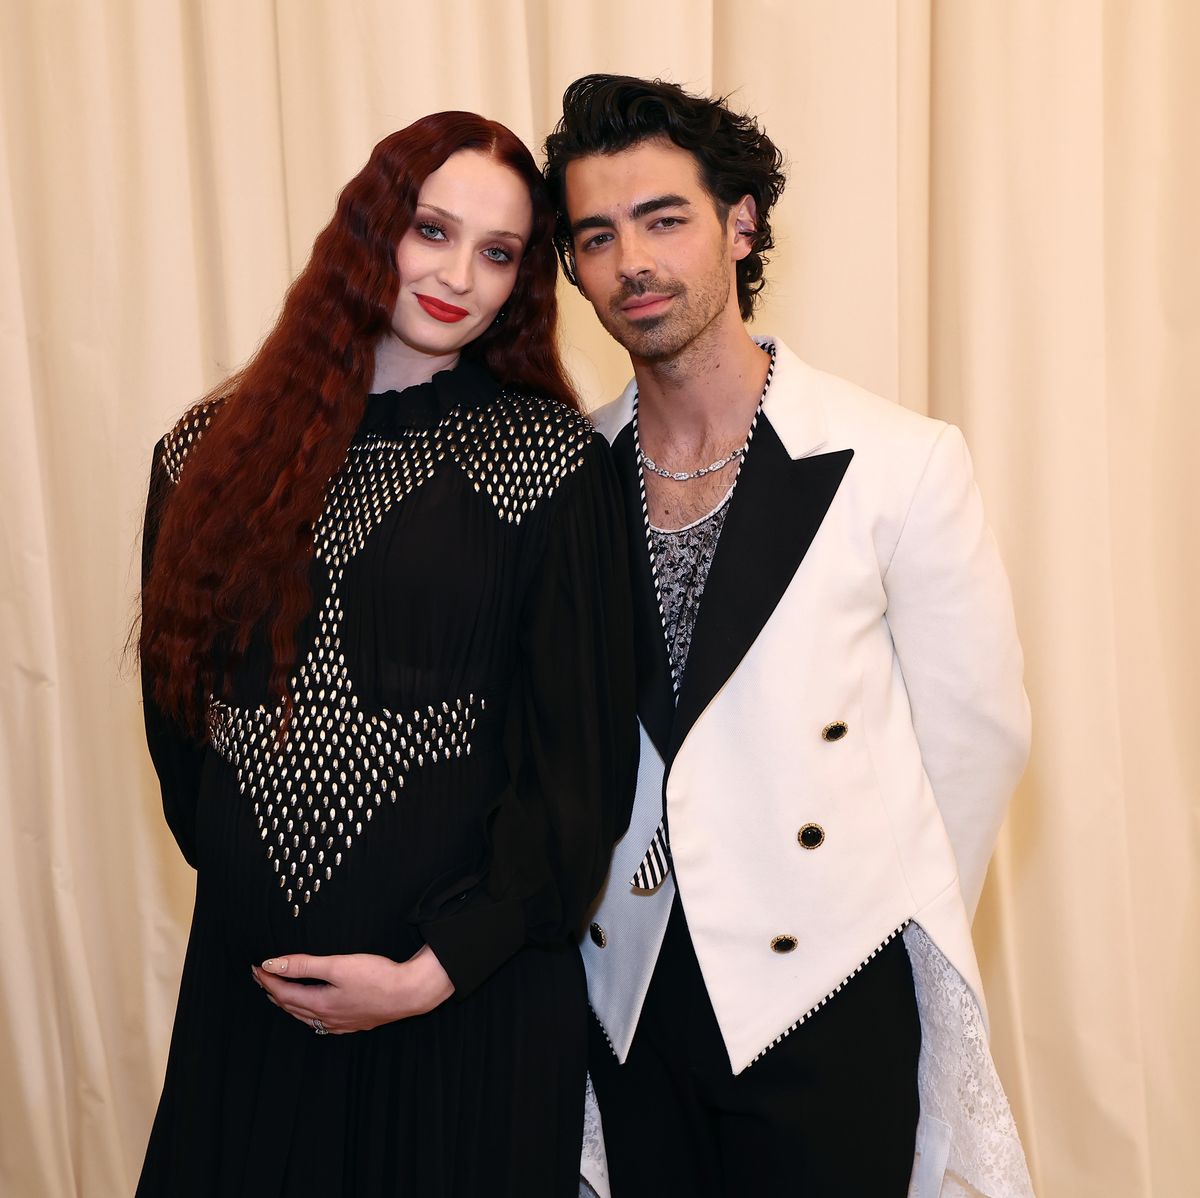 Sophie Turner And Joe Jonas' Parenting Timeline: Willa's Birth To Now